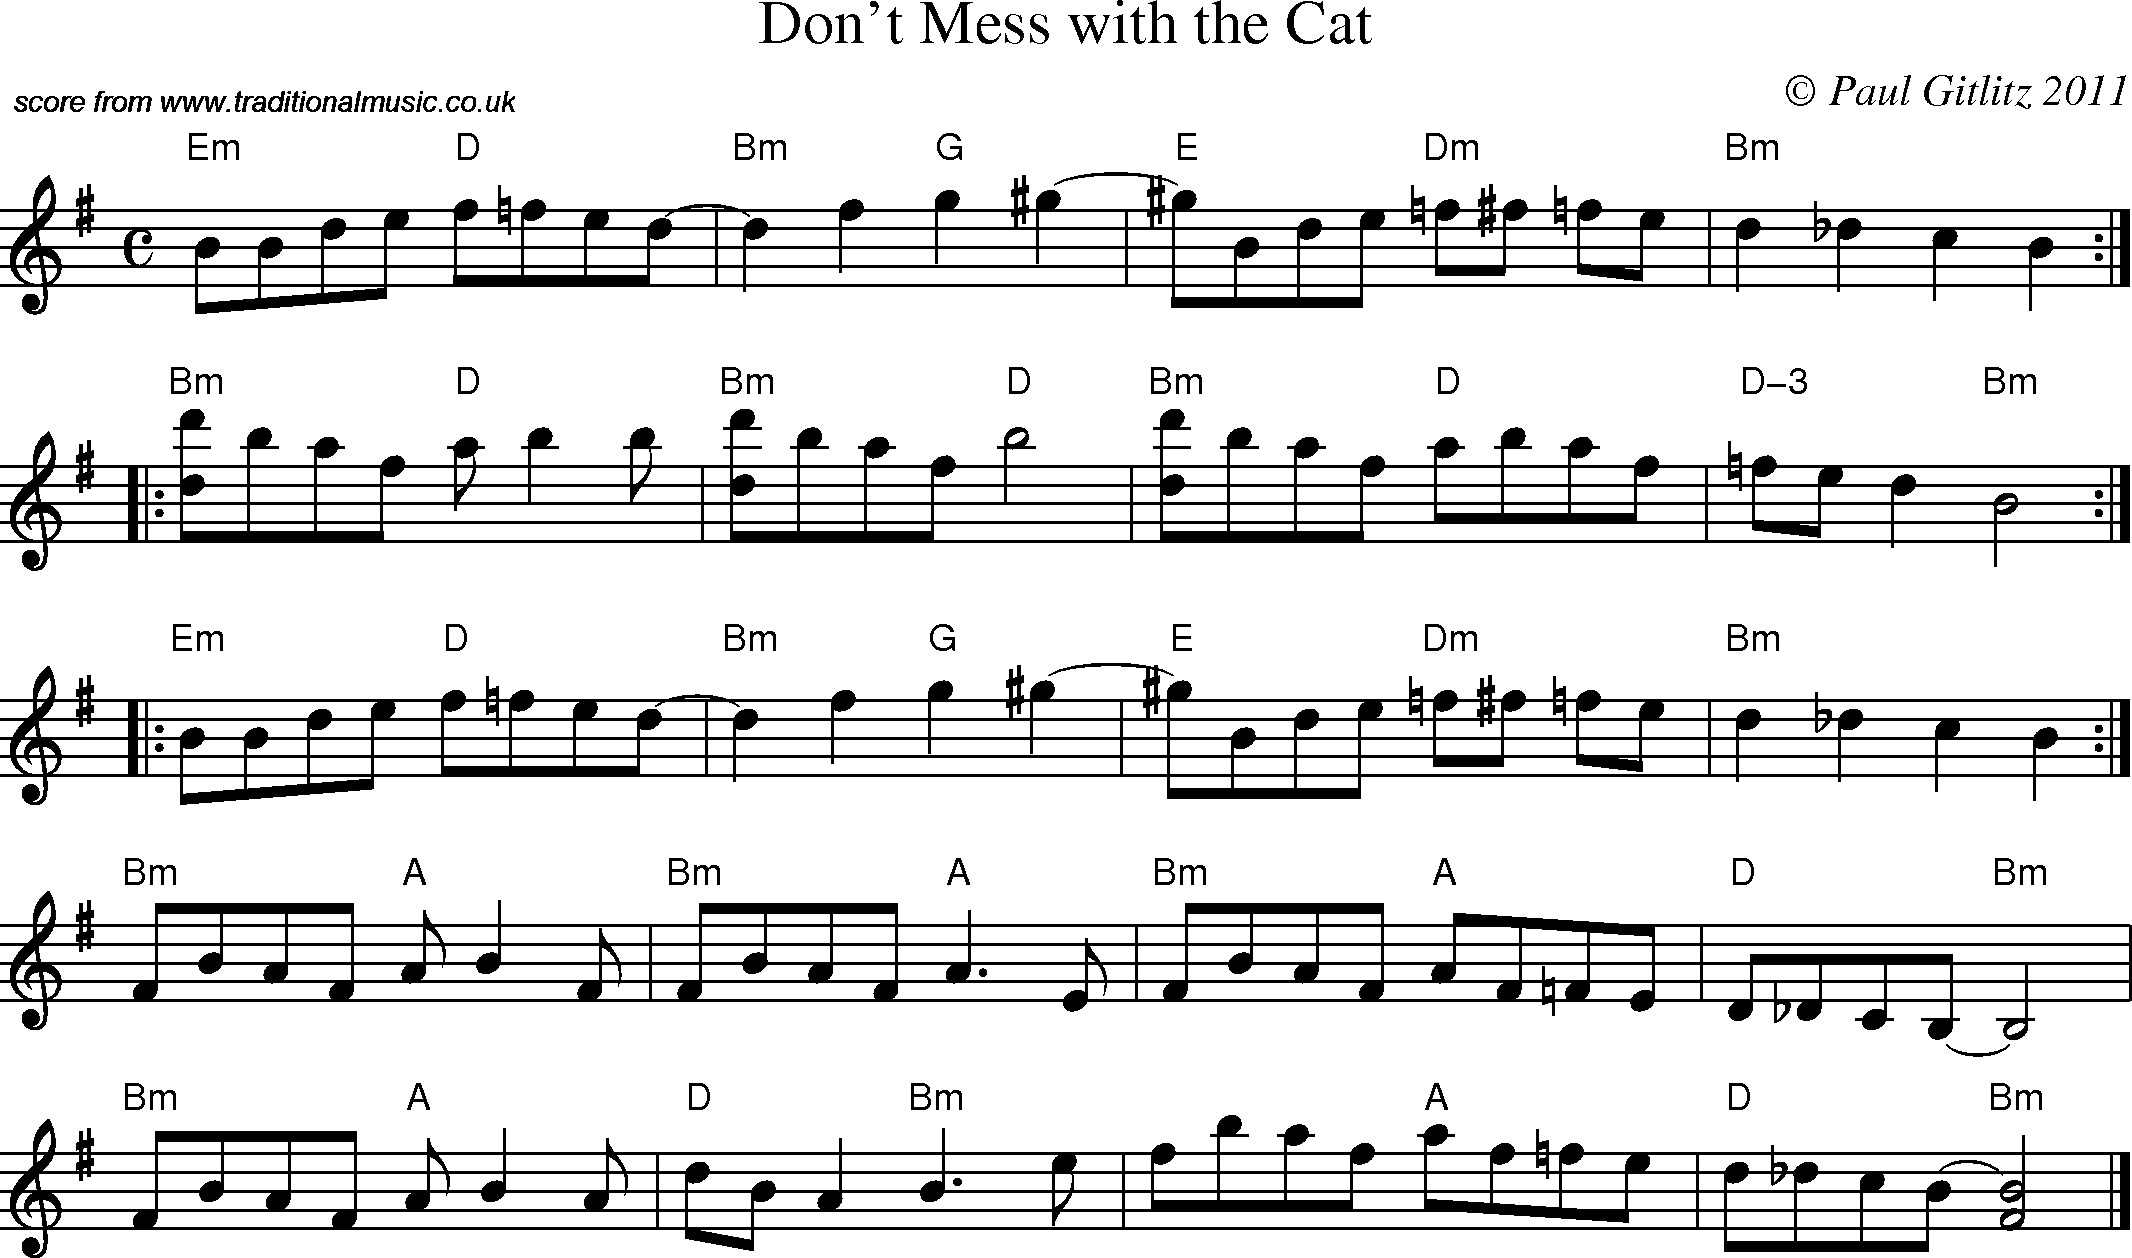 Sheet Music Score for Swing - Don't Mess with the Cat